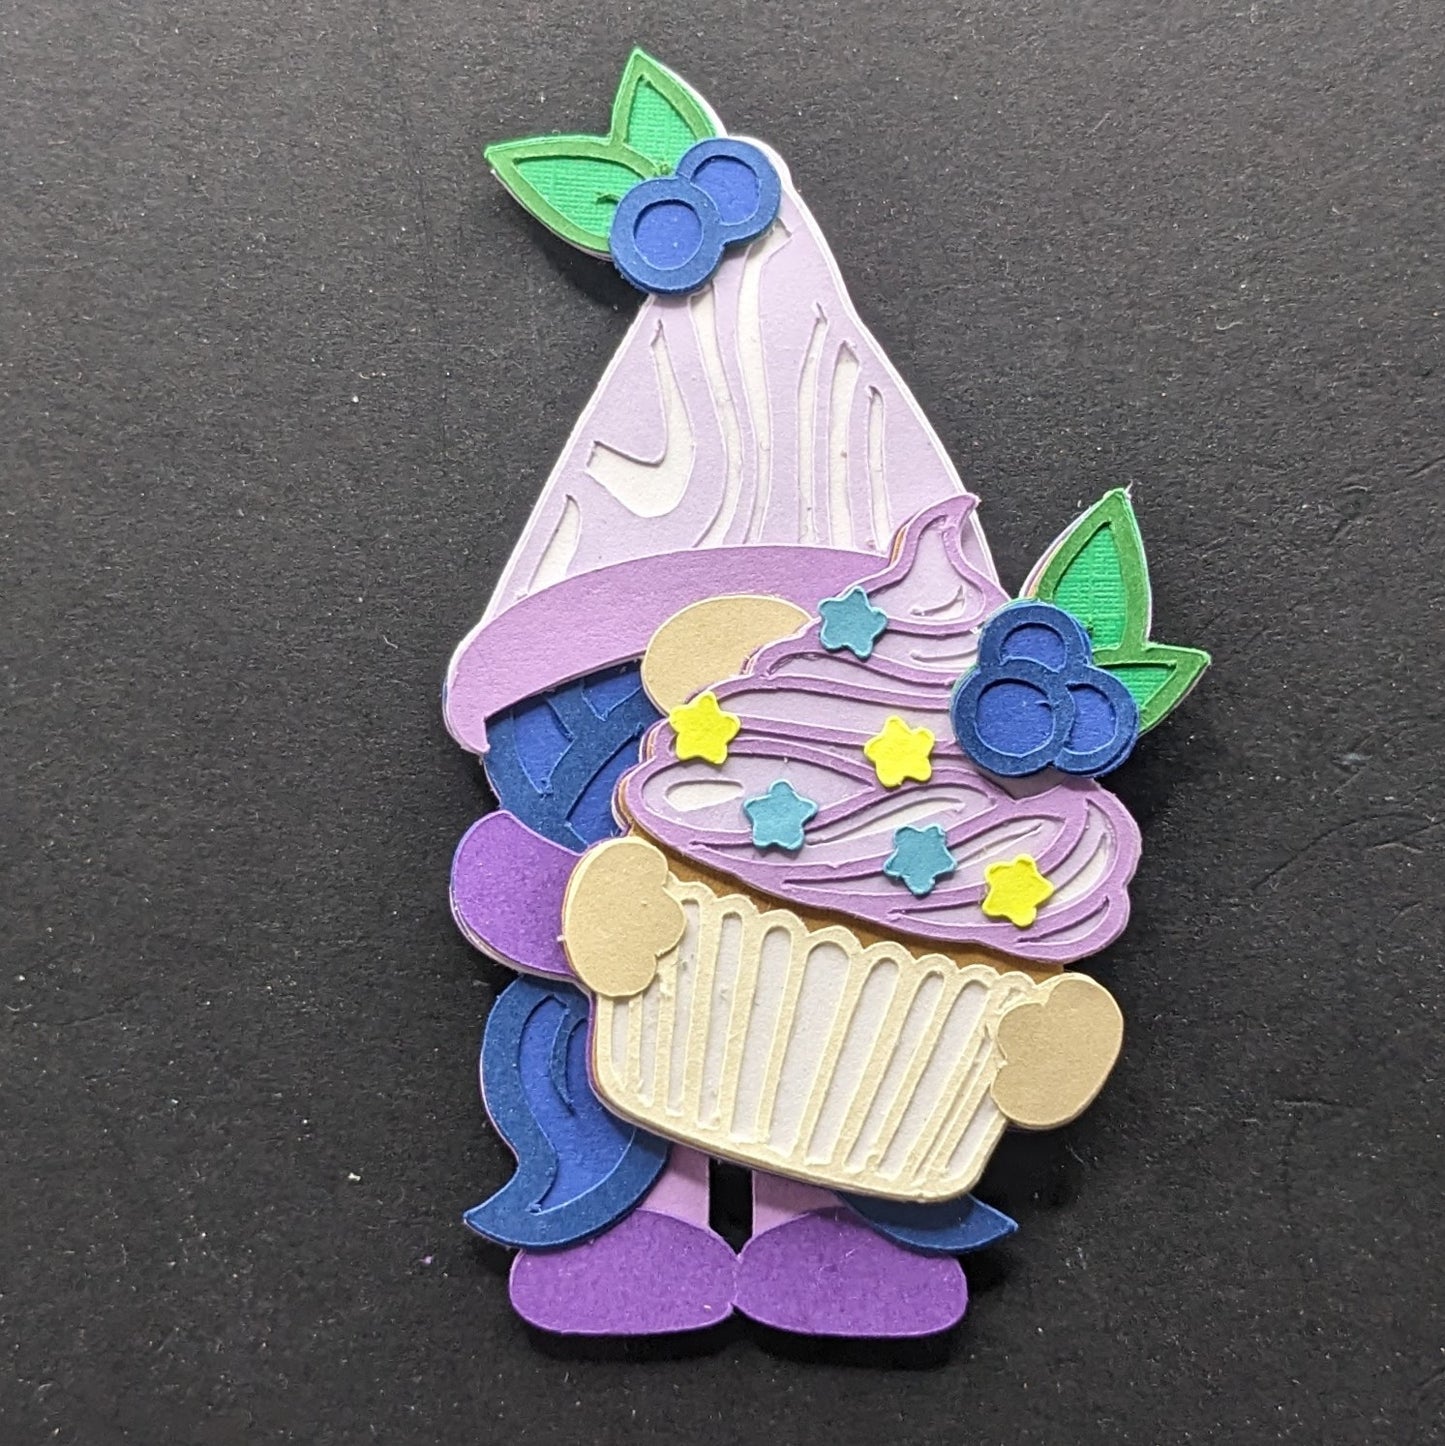 Sweet Gnomies: Adorable Kitchen Magnets